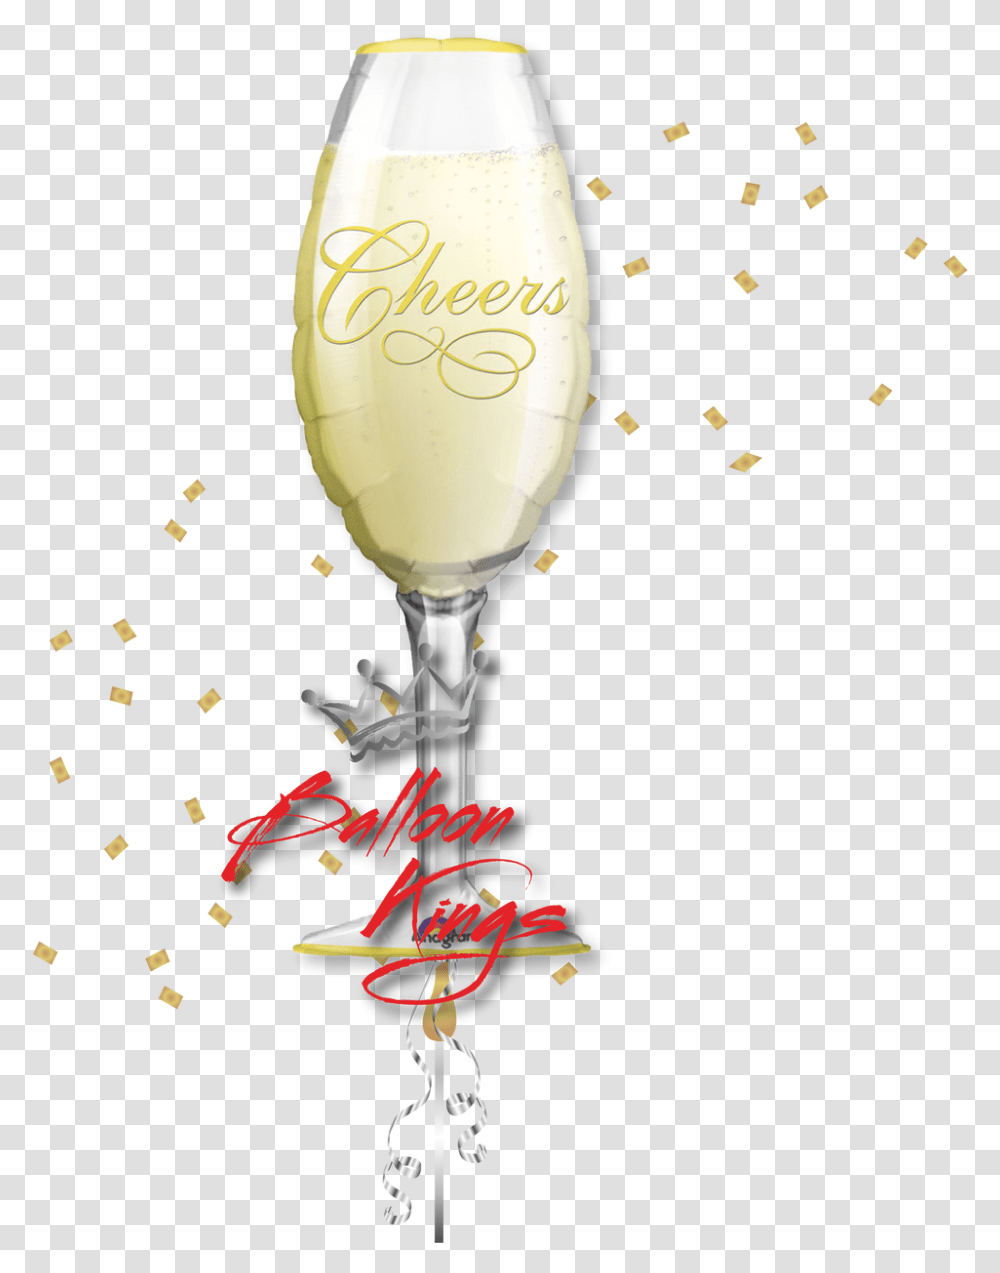 Champagne Glass Cheers Champagne Glass, Lamp, Beverage, Drink, Cocktail Transparent Png